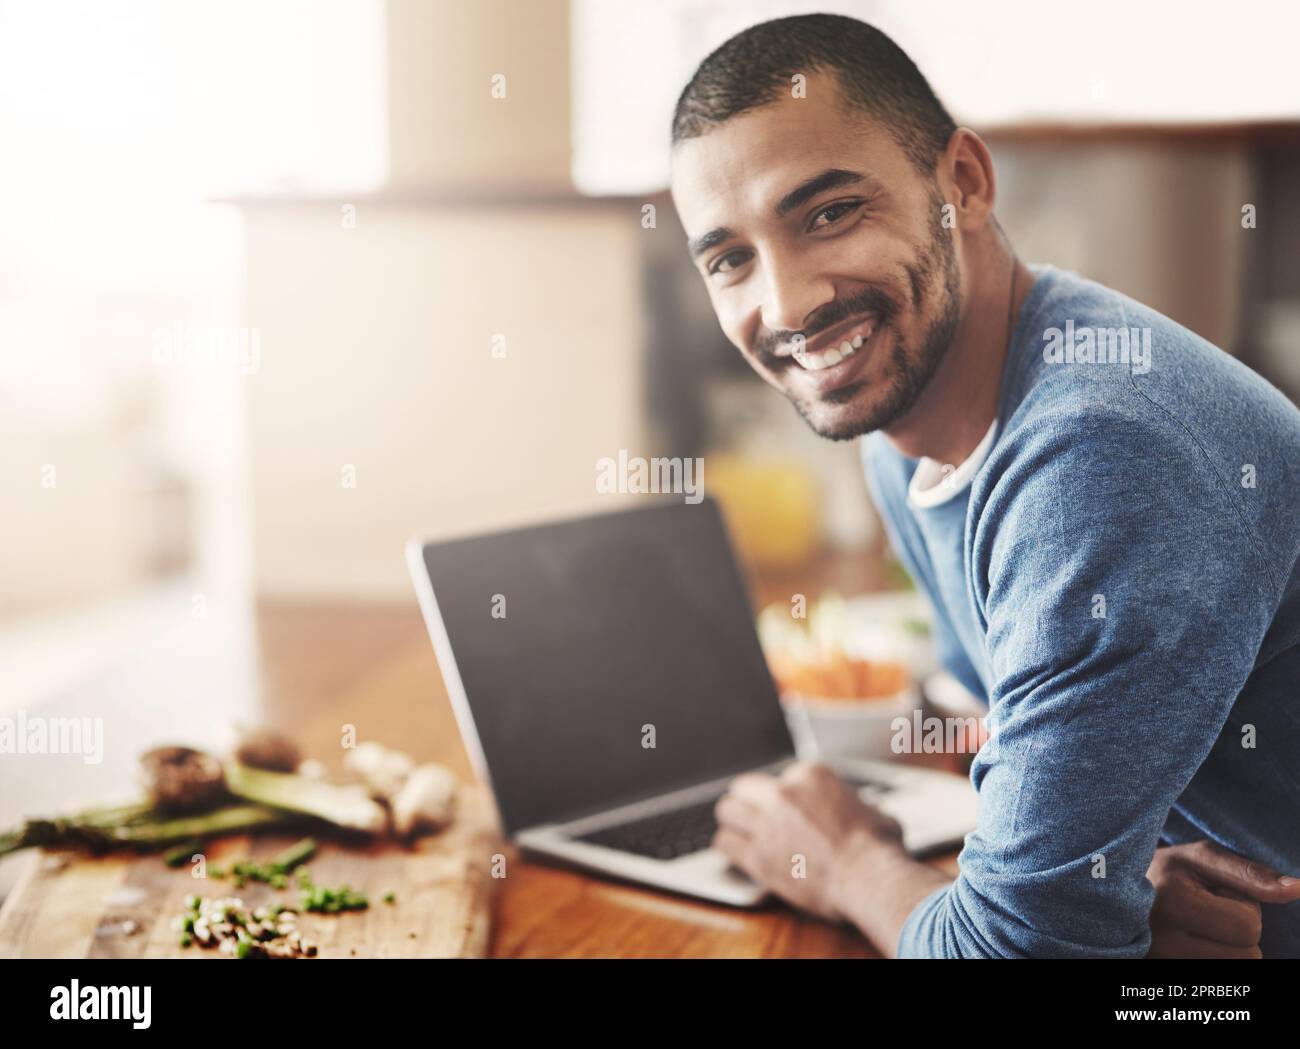 Young man on a laptop while preparing a healthy meal at home. Portrait Happy smiling male browsing and learning on computer in the kitchen on how to cook. Guy alone checking online recipes on the web Stock Photo